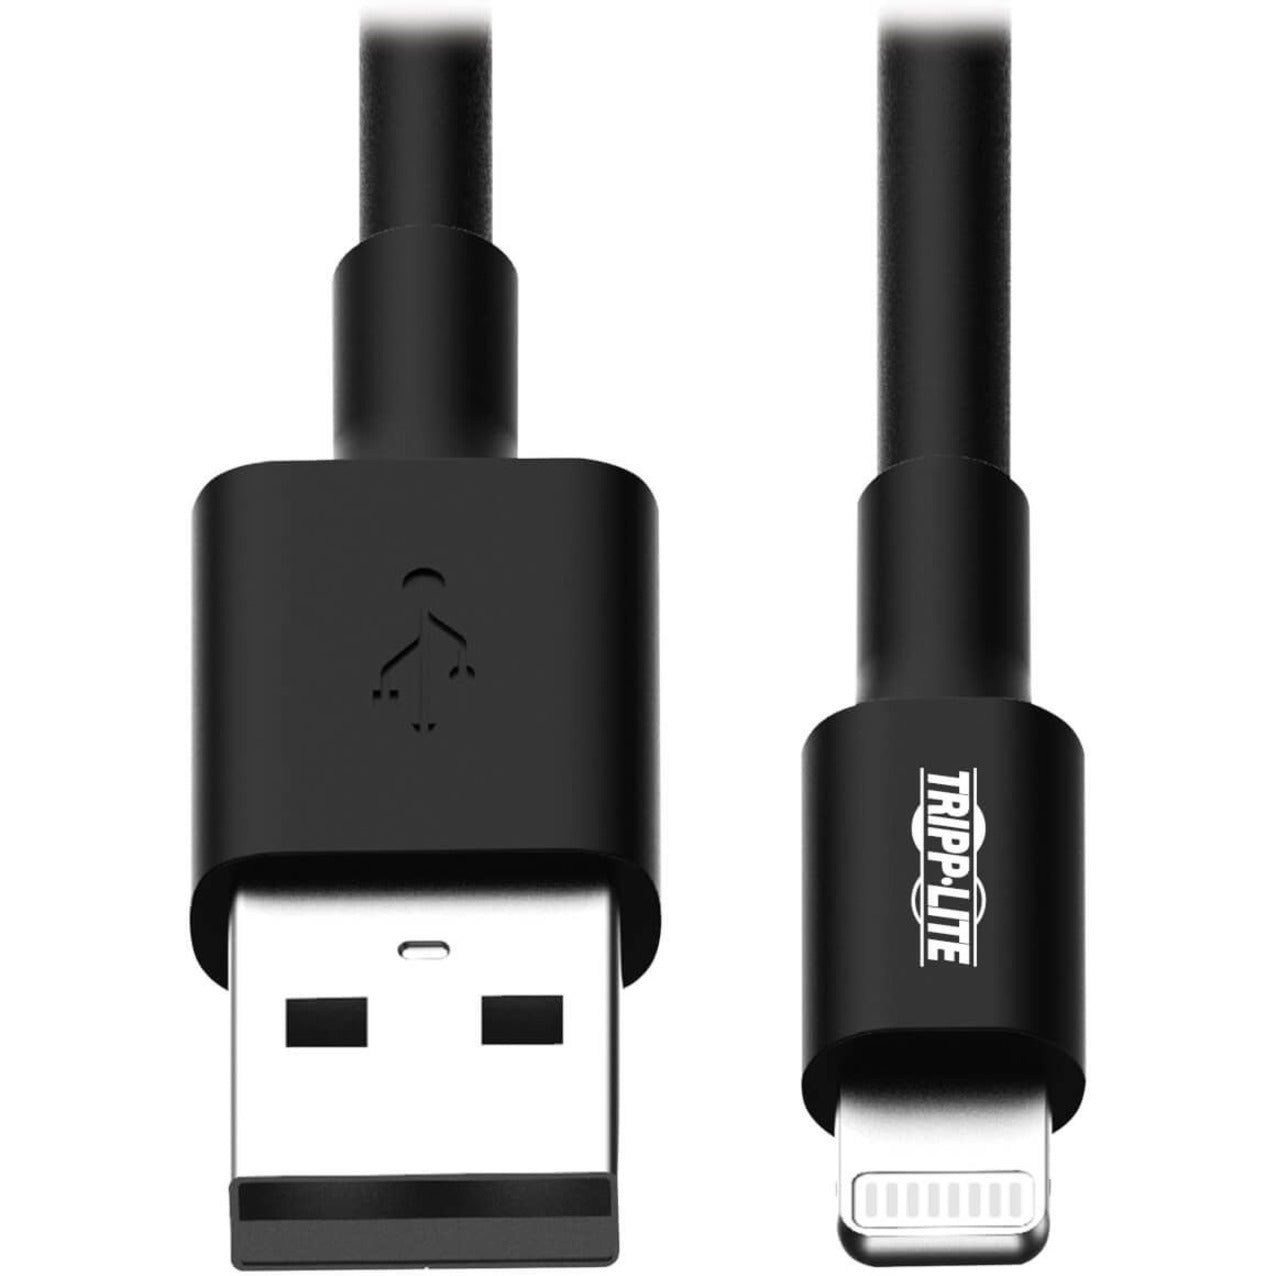 Tripp Lite M100-010-BK USB Sync/Charge Cable with Lightning Connector, Black, 10 ft. (3 m)